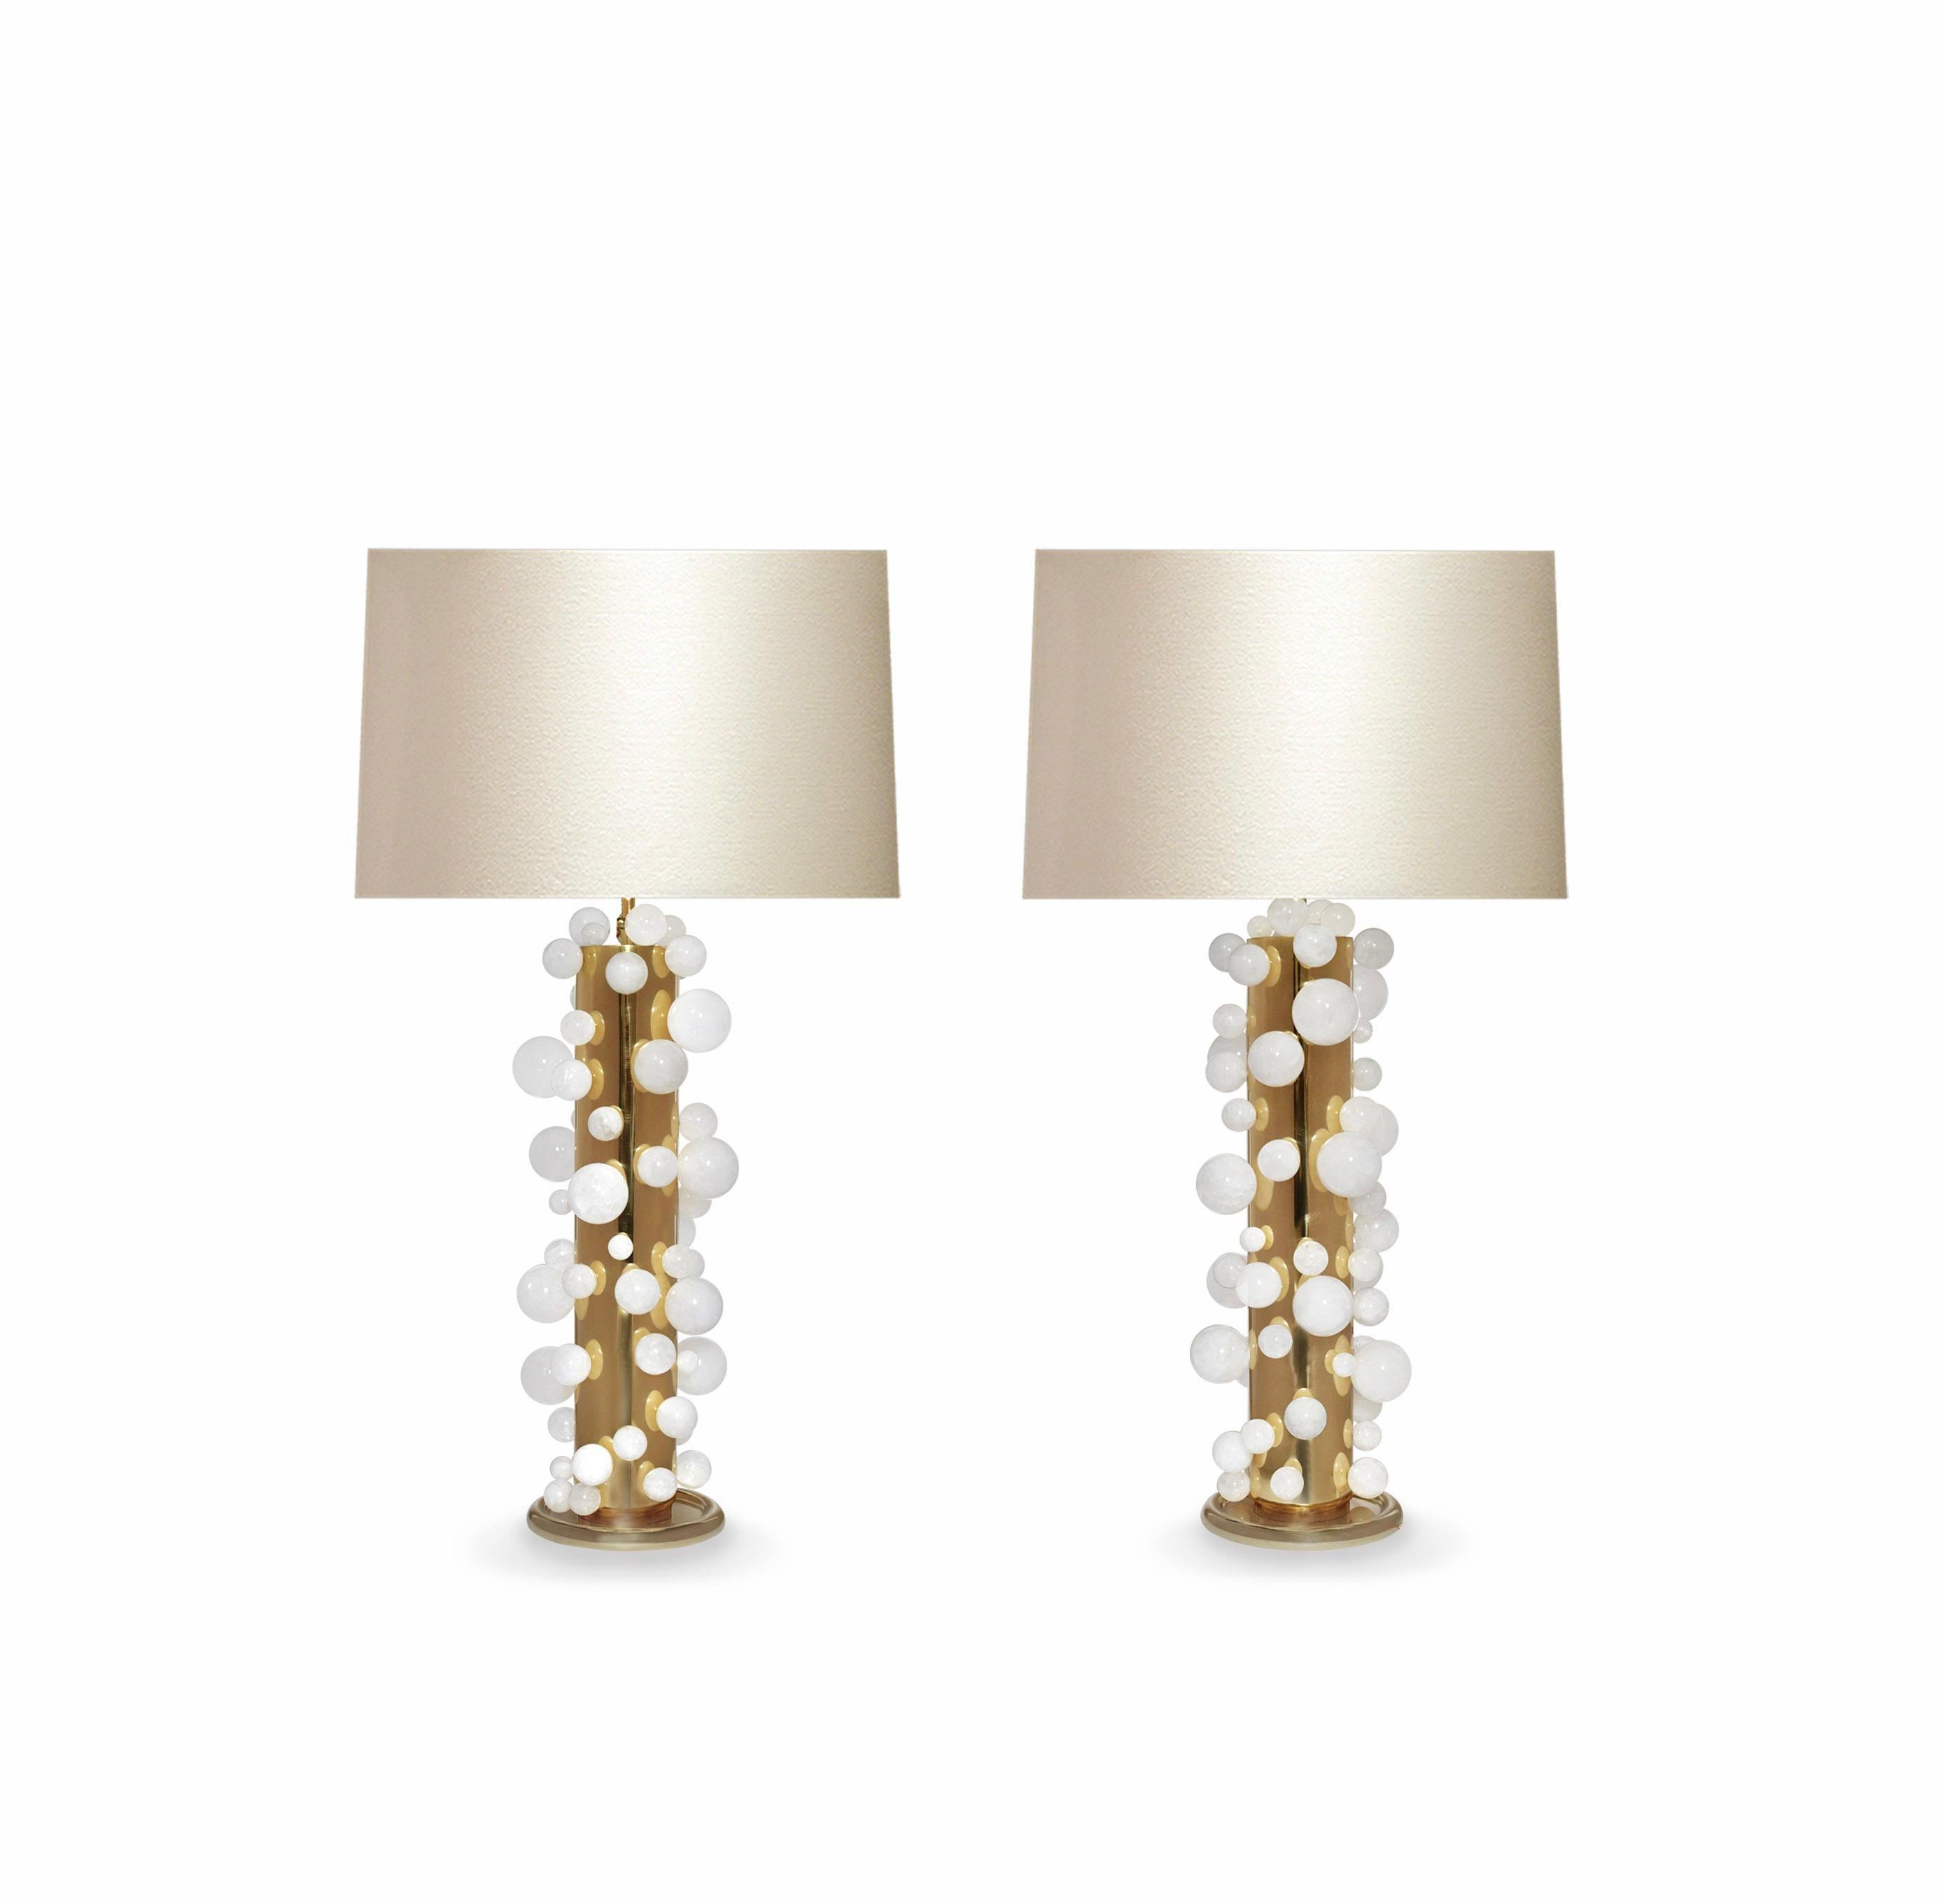 A tall pair of luxury rock crystal quartz bubble lamps with polished brass frames. Created by Phoenix Gallery, NYC.
Each lamp installed two sockets.
To the top of the rock crystal 25.75